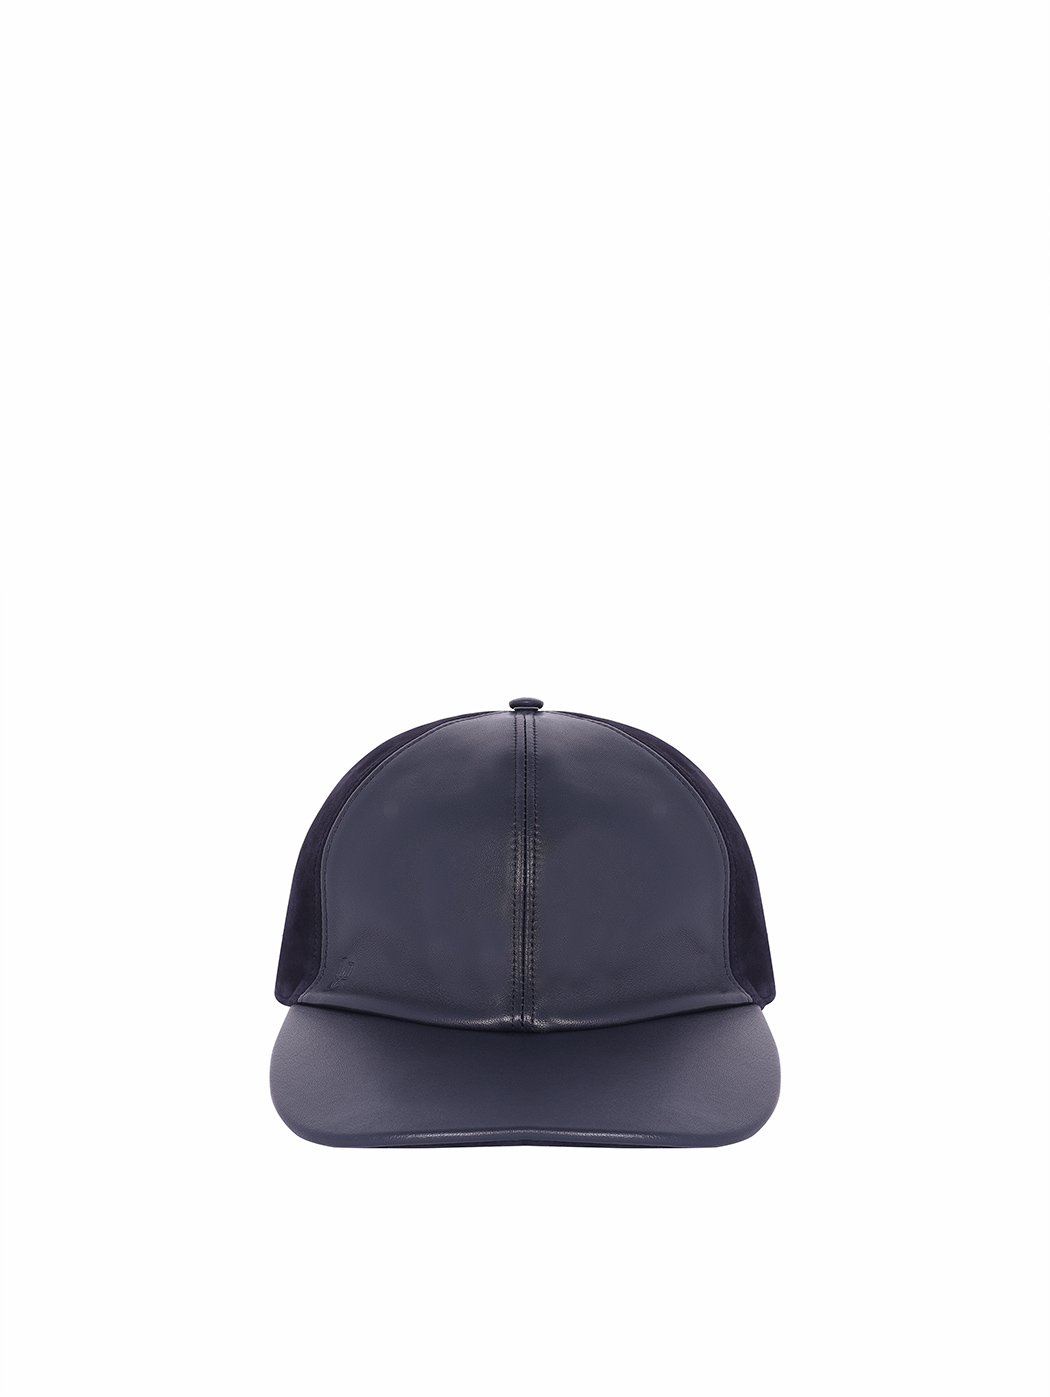 Blue Baseball hat in leather and suede